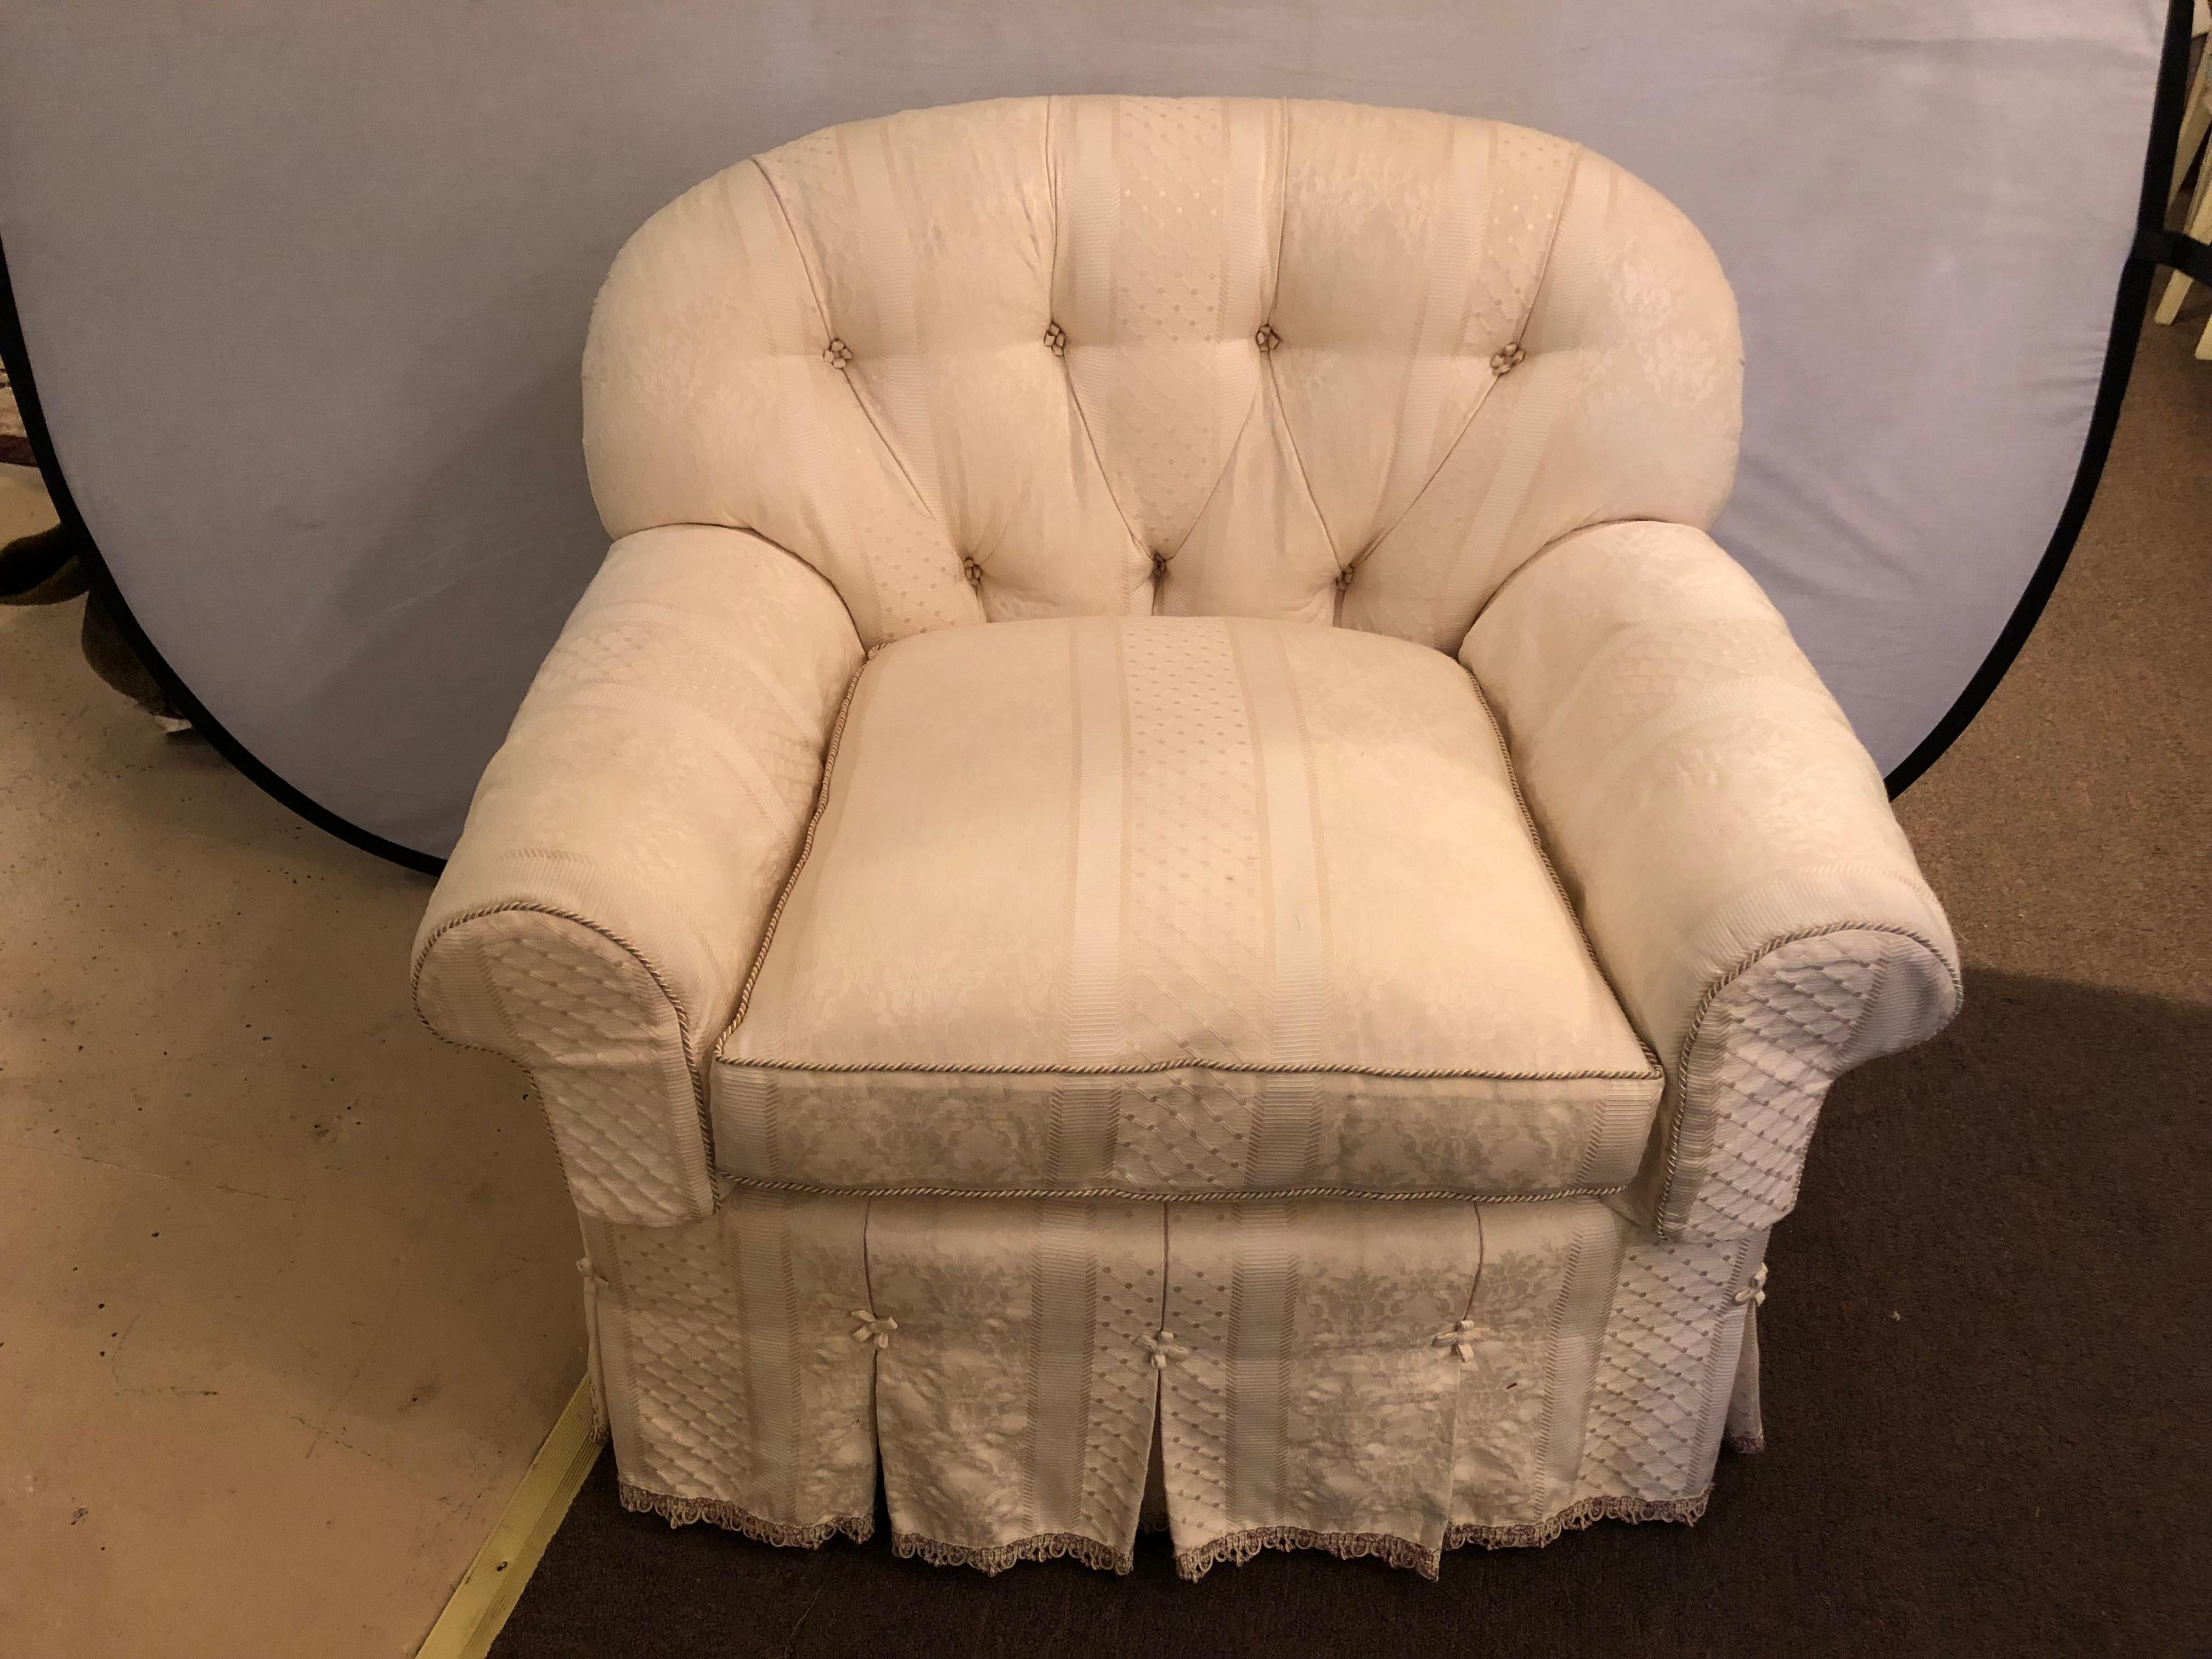 Hollywood Regency style overstuffed very fine upholstered lounge chair attributed to O Henry House LTD. This sleek and stylish extra wide and deep lounge or living room chair is stunning and comes from part of a massive collection of upholstered